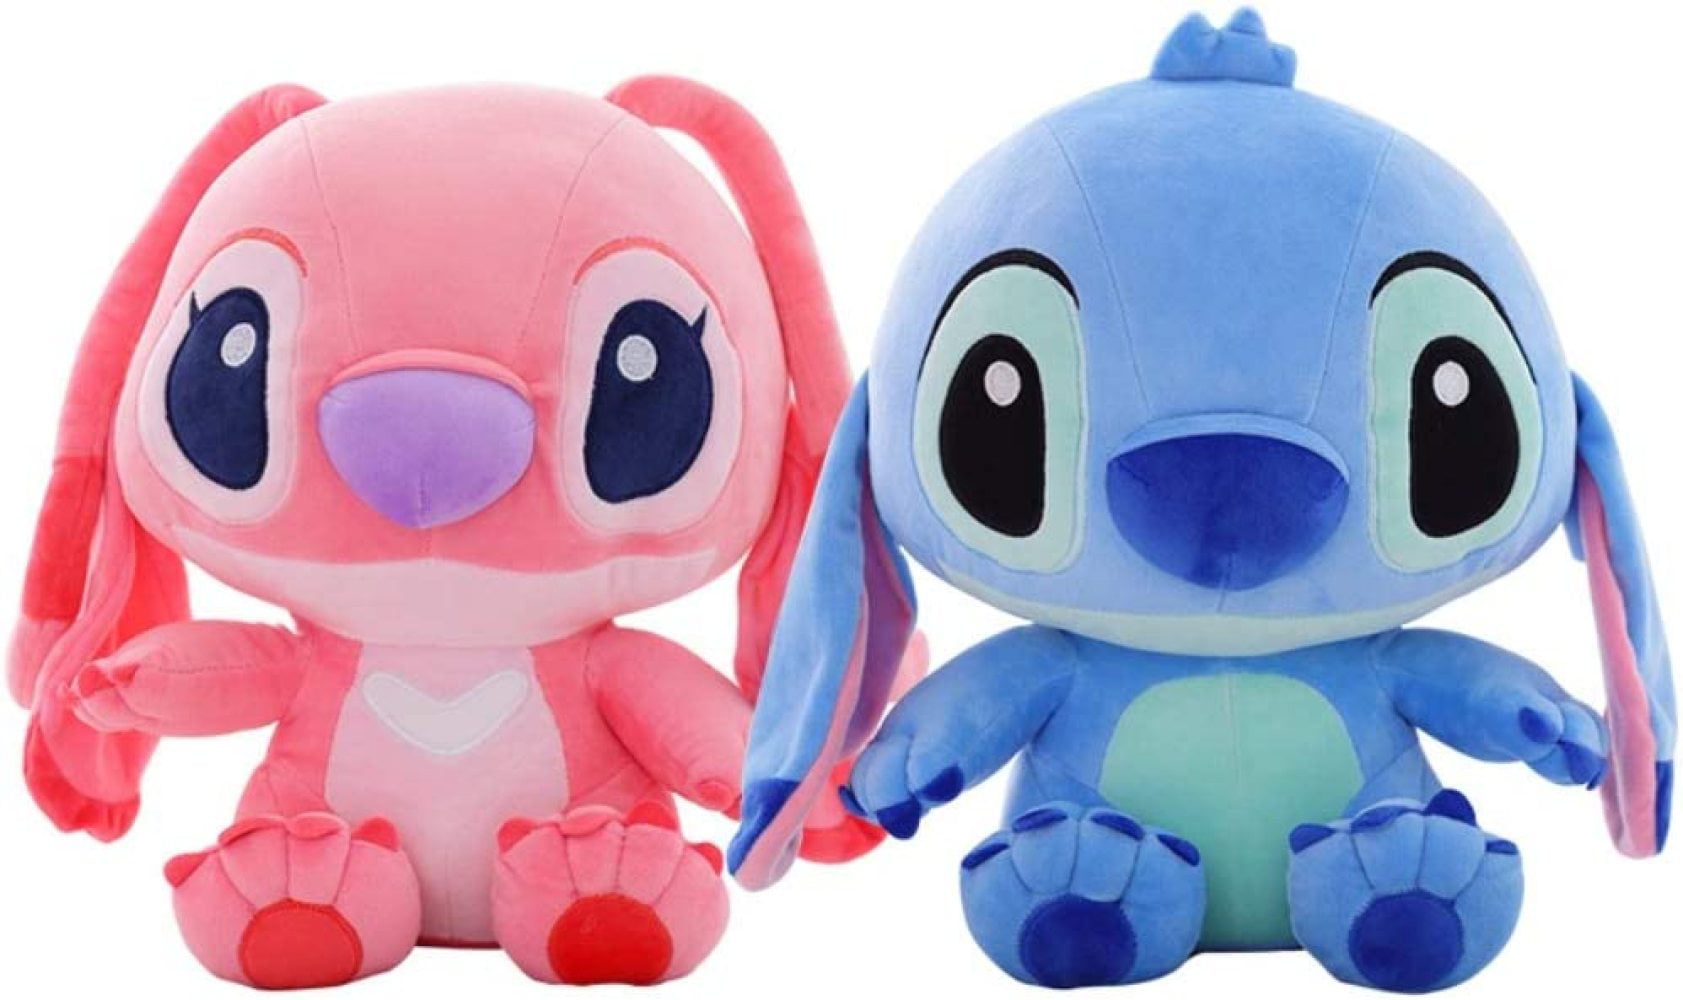  STITCH Disney Small 7-inch Plush Stuffed Animal, Angel with  Strawberry, Officially Licensed Kids Toys for Ages 2 Up by Just Play : Toys  & Games